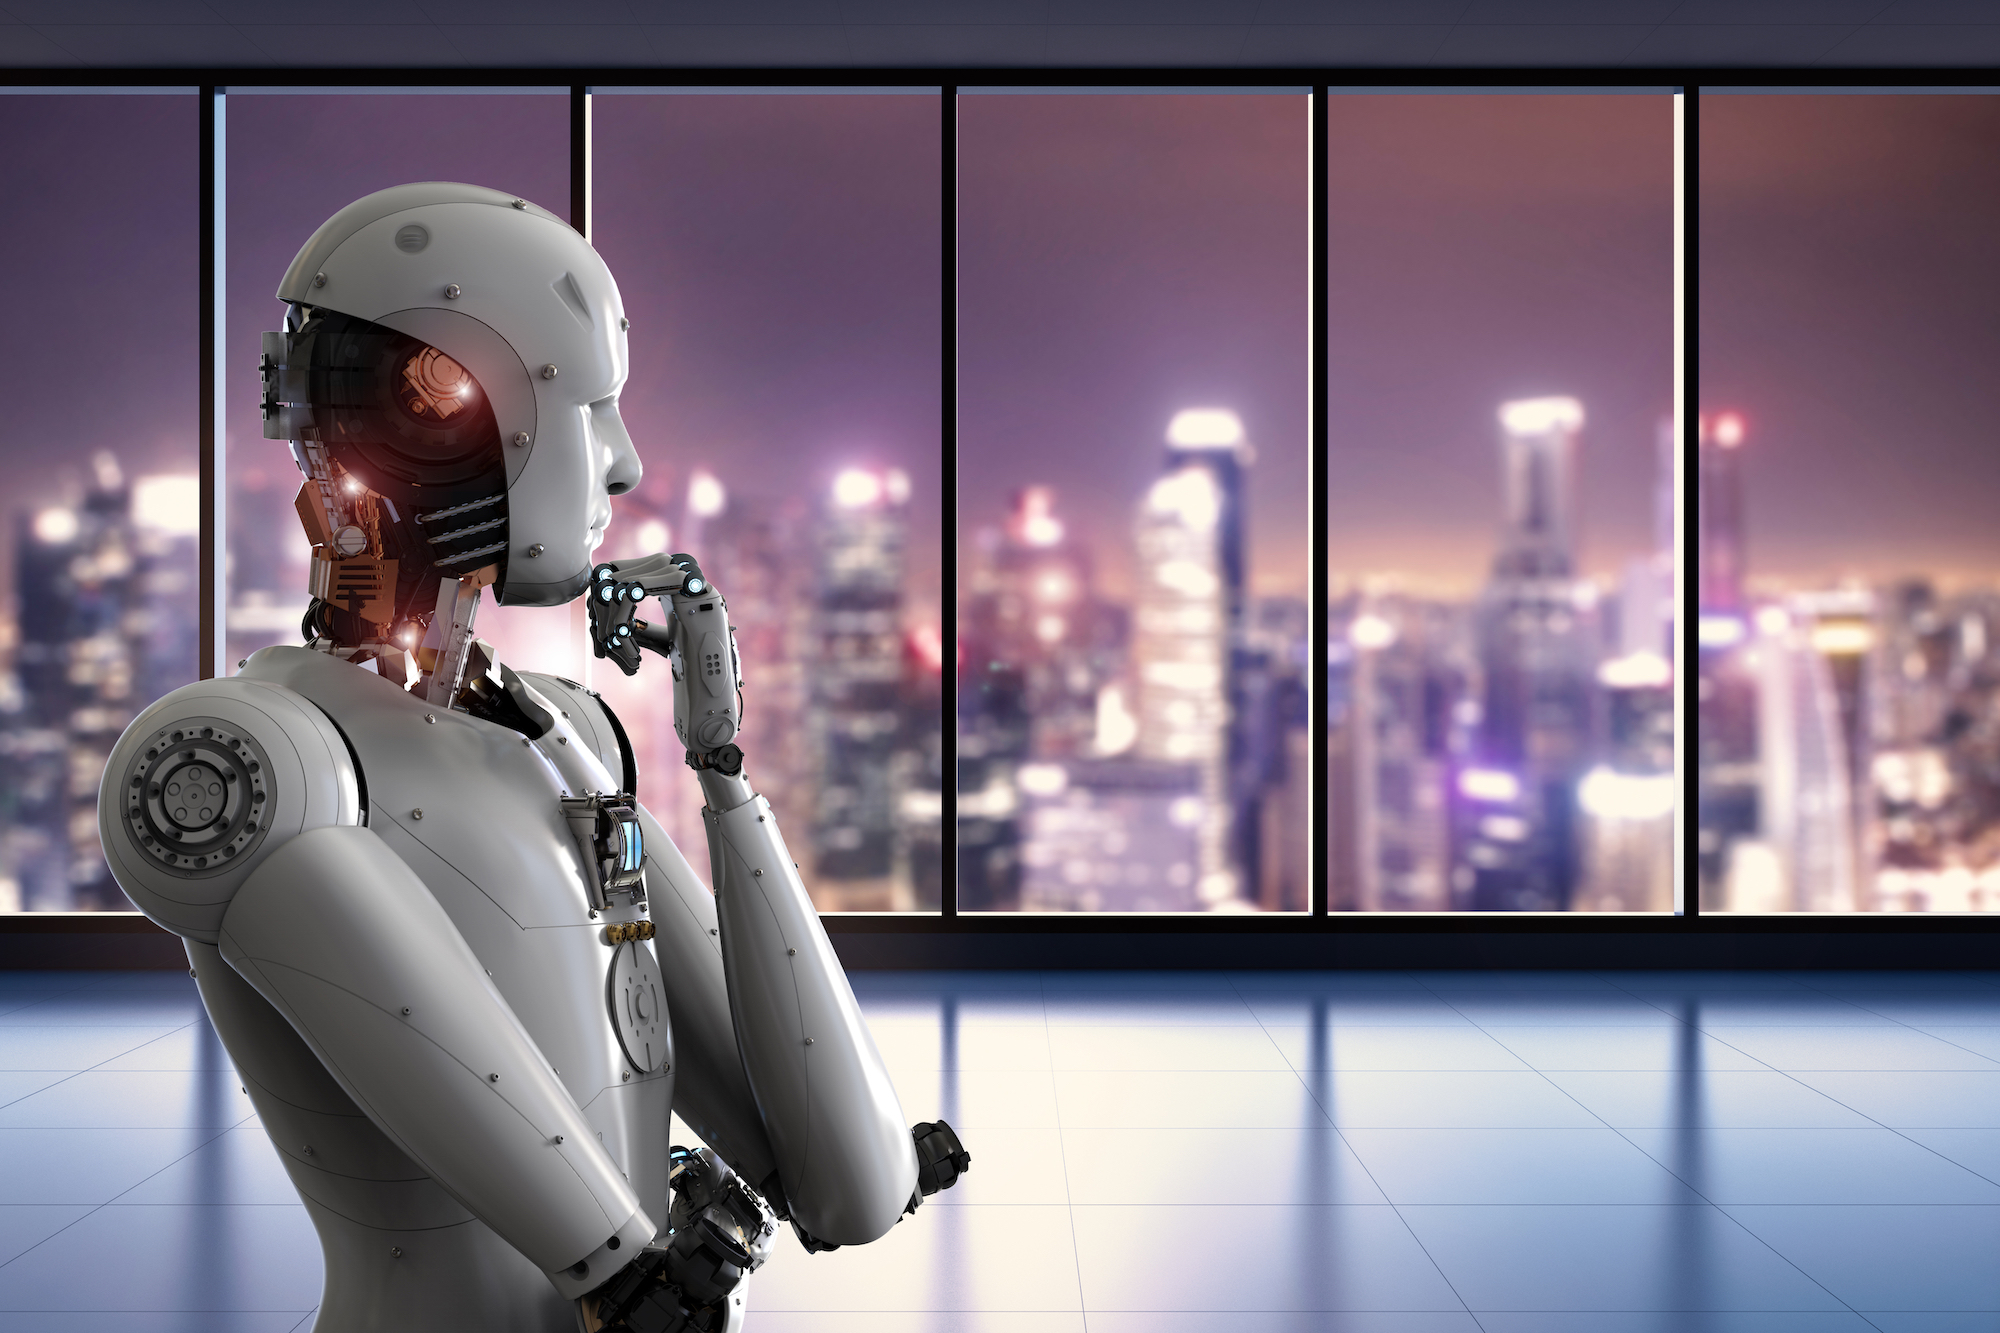 Having the right sonic language will help us accept robots as non-threatening. Image: Shutterstock